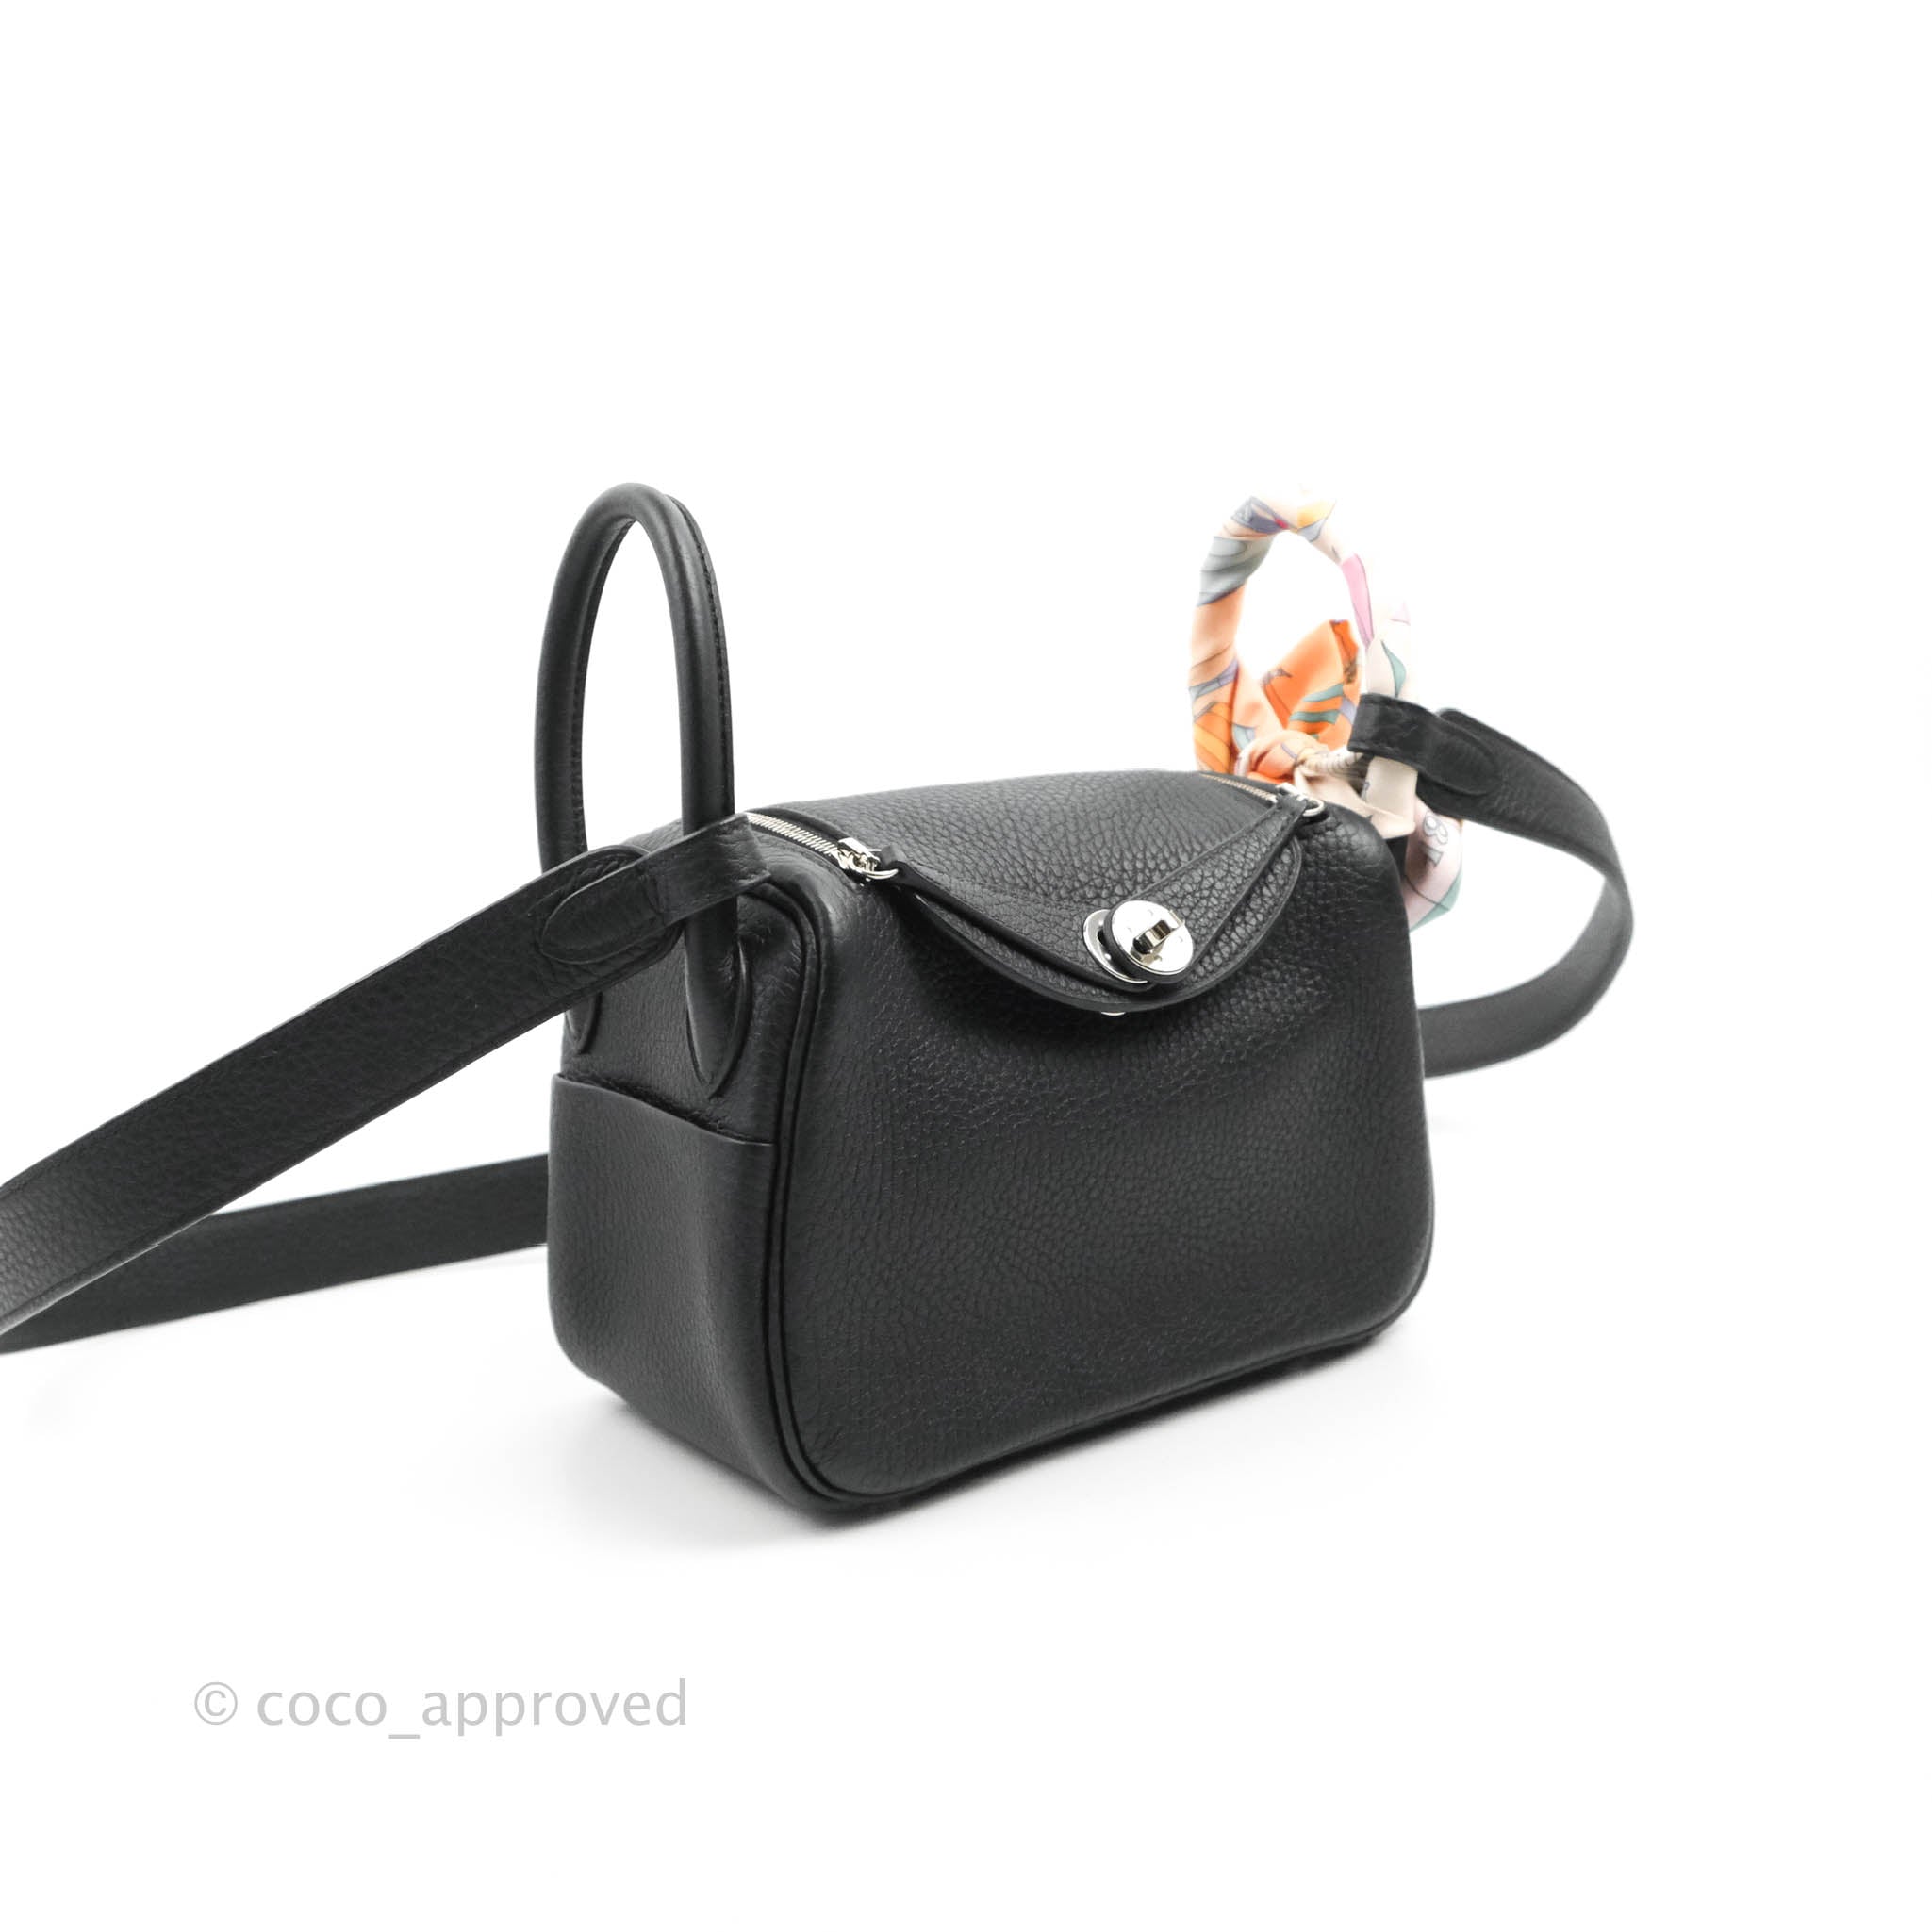 Hermes Mini Lindy 20 in Rose Texas Taurillon Clemence with Gold Hardware -  ShopStyle Shoulder Bags